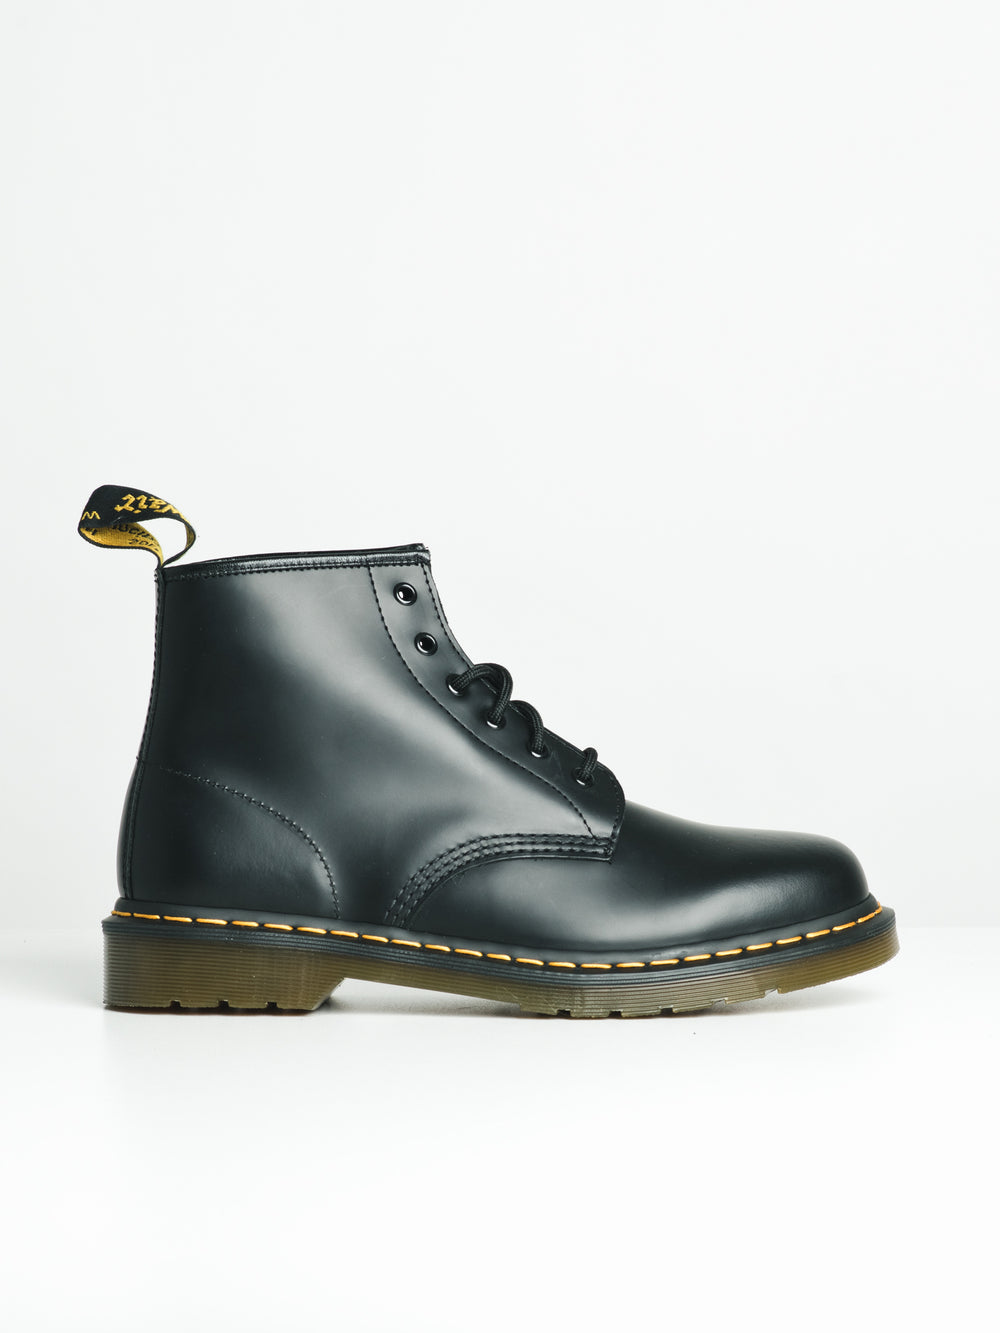 MENS DR MARTENS 101 YELLOW STITCH SMOOTH BOOT - CLEARANCE